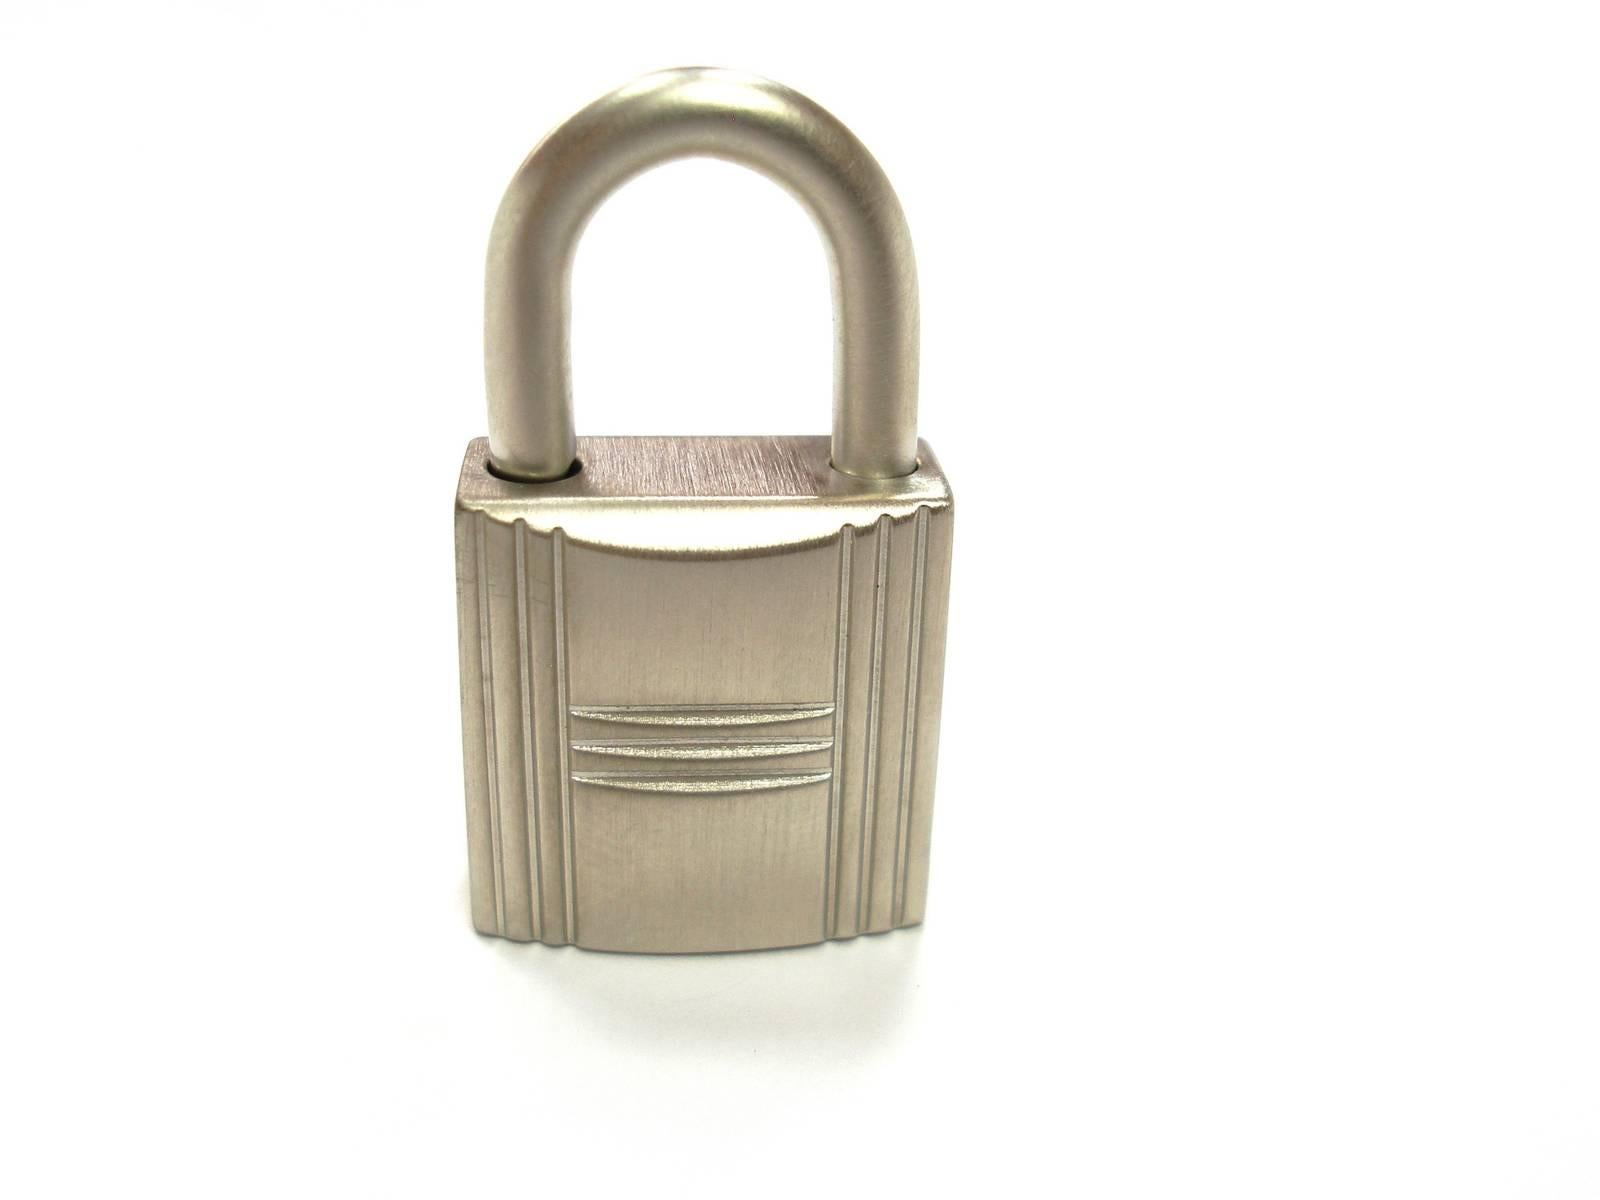 HERMES CADENAS LOCK & 2 KEYS FOR BIRKIN OR KELLY BOLIDE AND PICOTIN BAG 
BRUSH FINISH 
Numeroted N°100 
HAS BEEN TESTED
Its comes 2 KEYS 
Standard size : 2 cm x 3.5 cm ( with ring ) 
Sorry no box , no dustbag
READY TO SHIP NOW
Thank you for looking